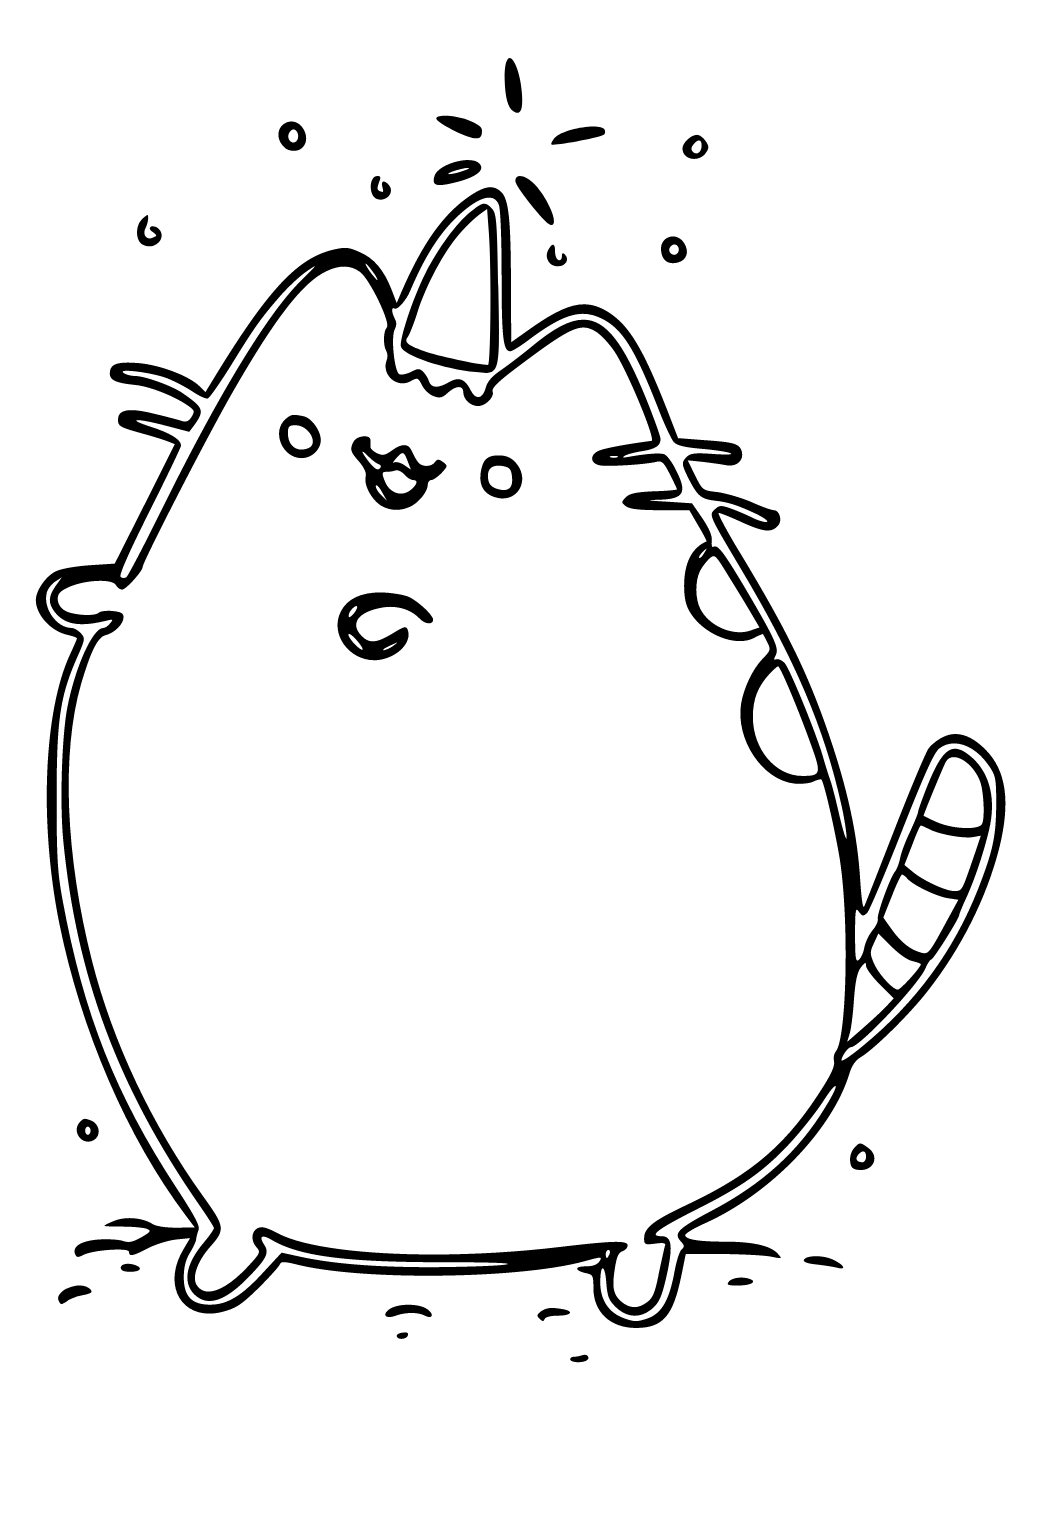 Free printable pusheen unicorn coloring page for adults and kids